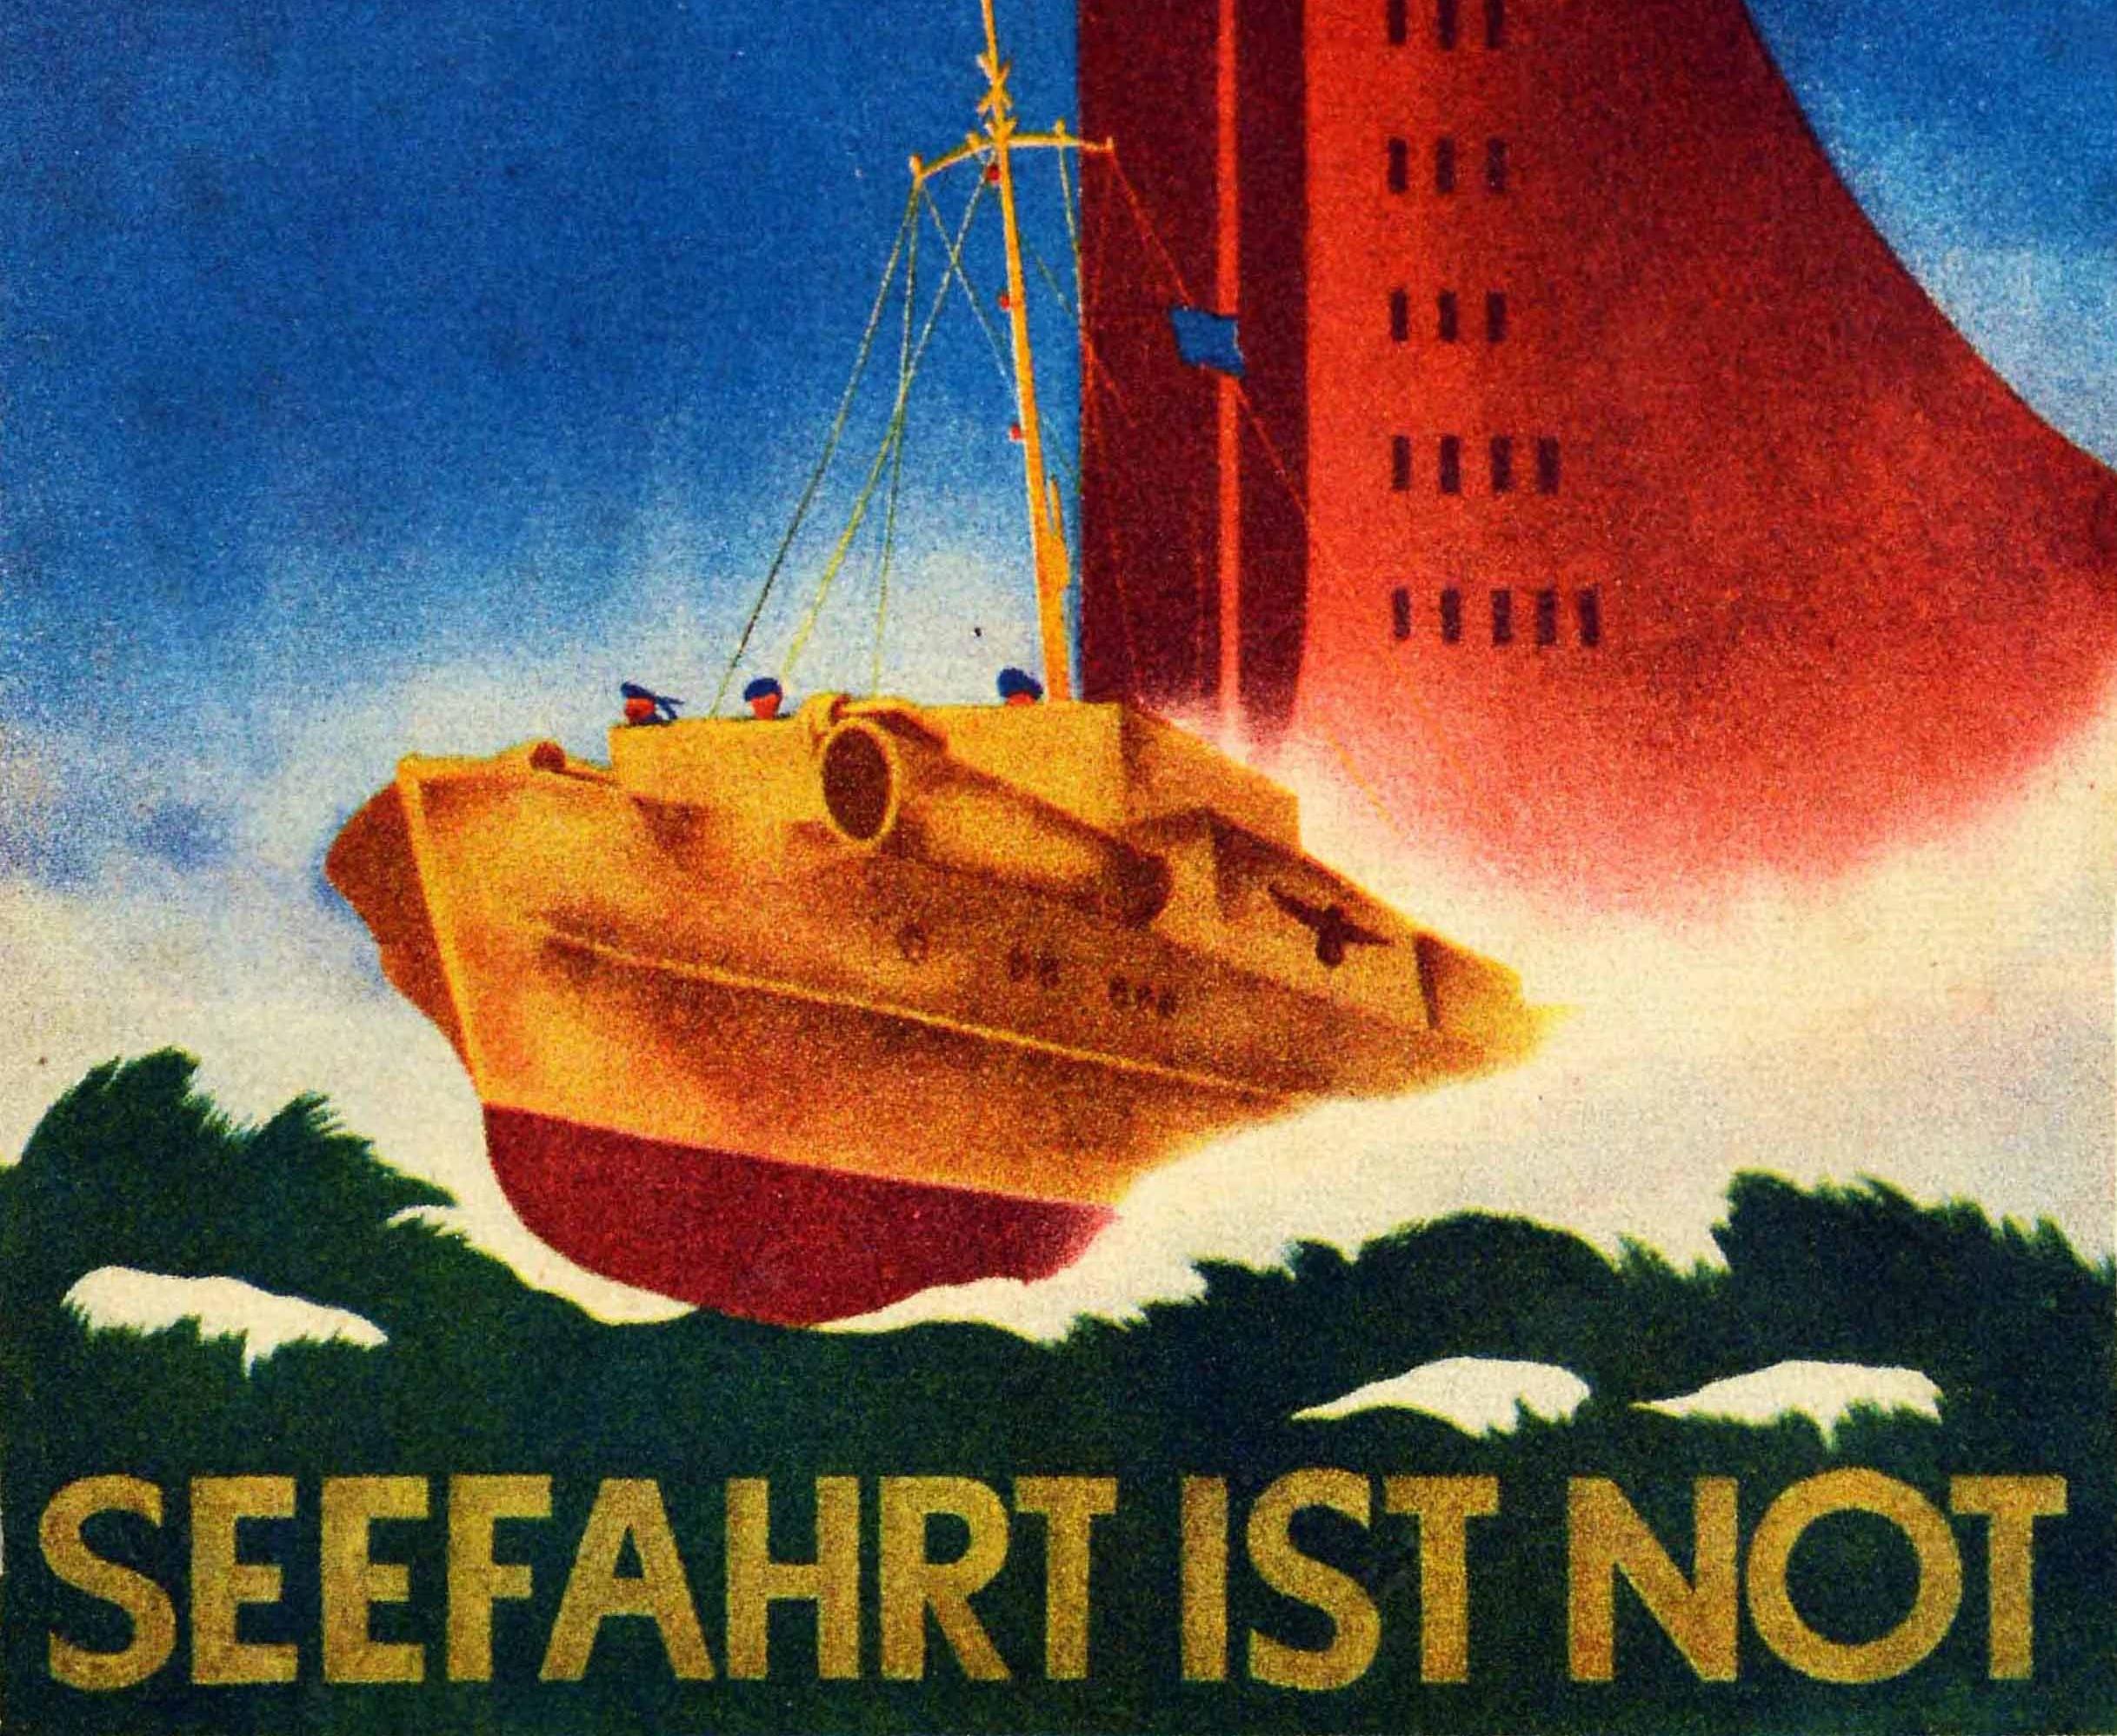 German Original Vintage Seefahrt Ist Not Poster Sea Quote Navy Shipping Is A Necessity For Sale